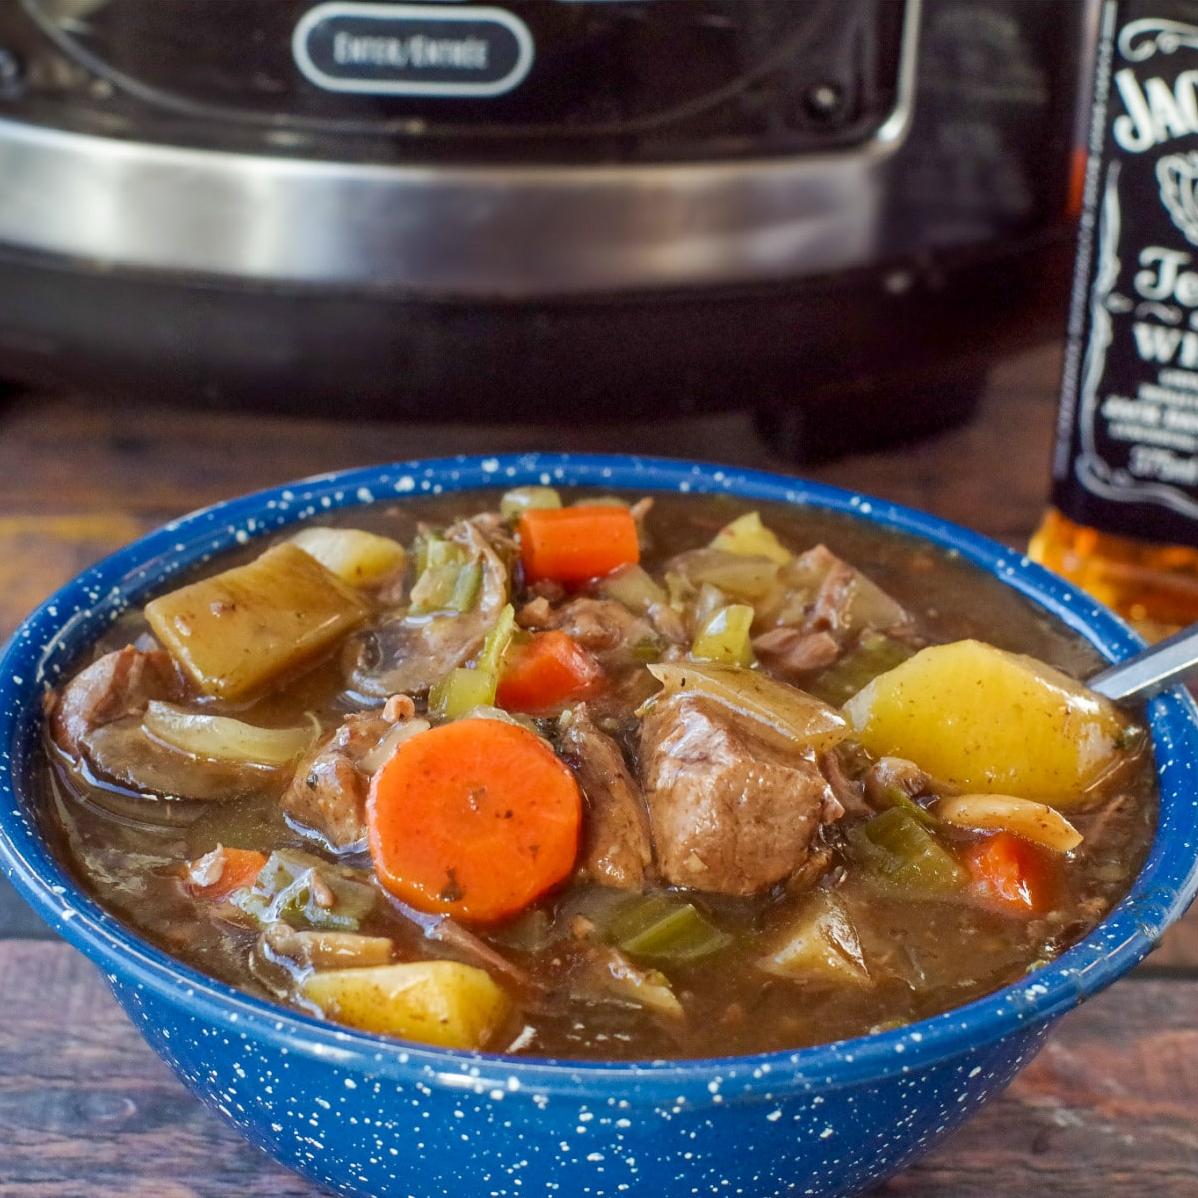  The ultimate comfort food that's easy to make in a crockpot.